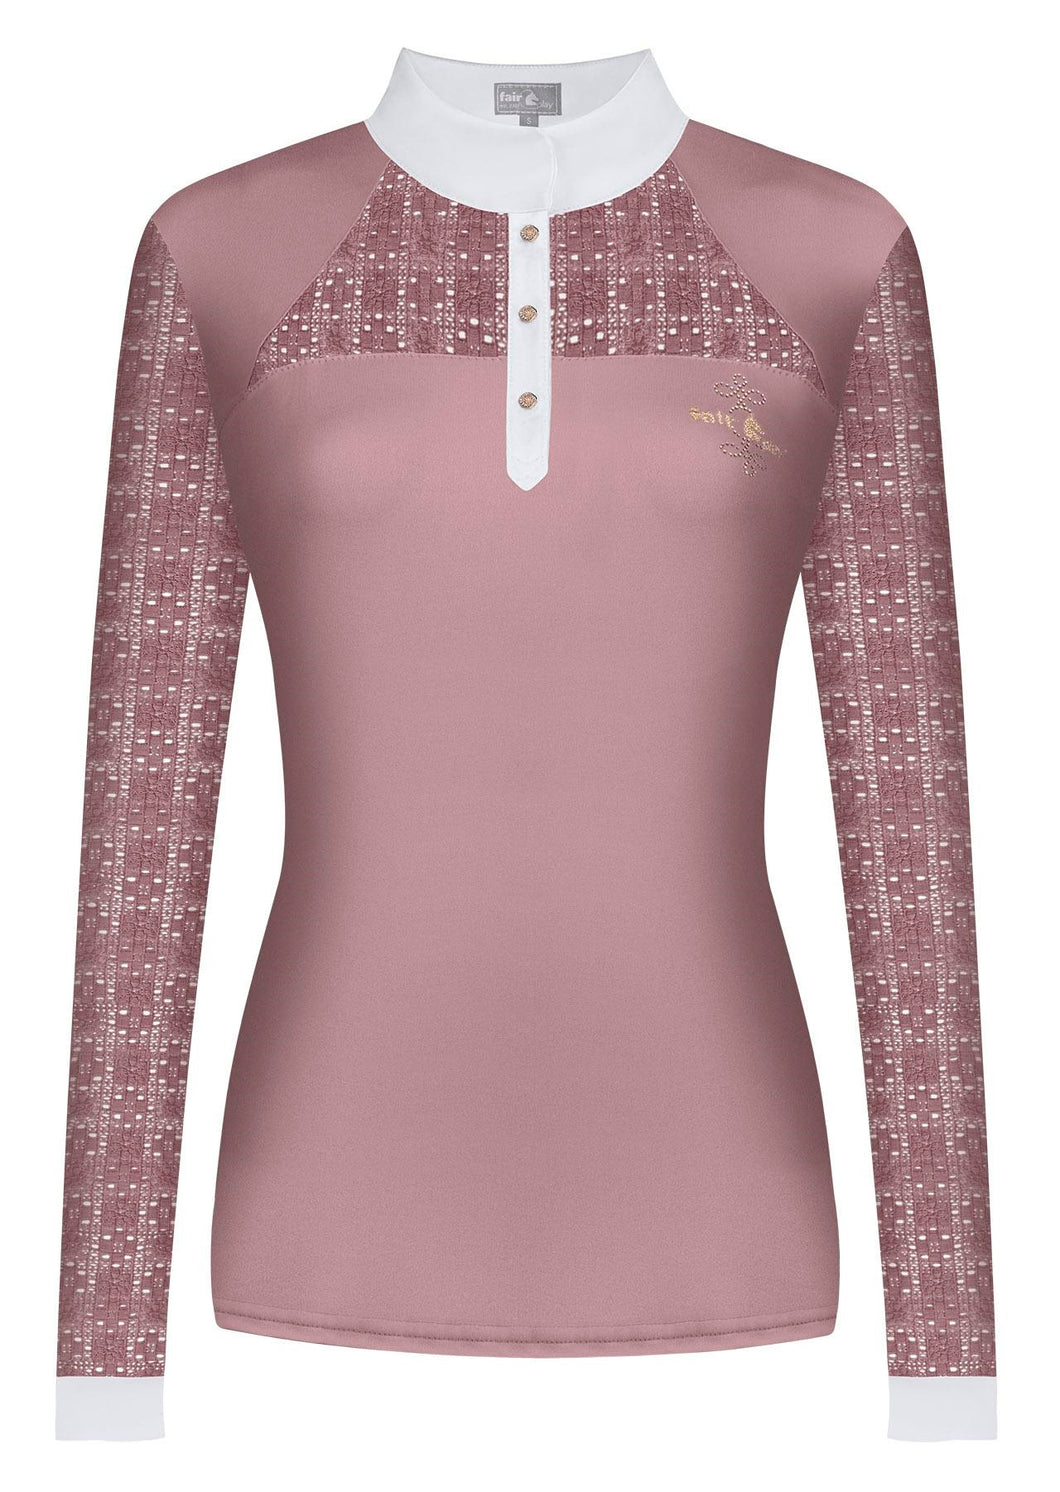 Fair Play Competition Shirt AIKO ROSEGOLD LS, Dusty Pink